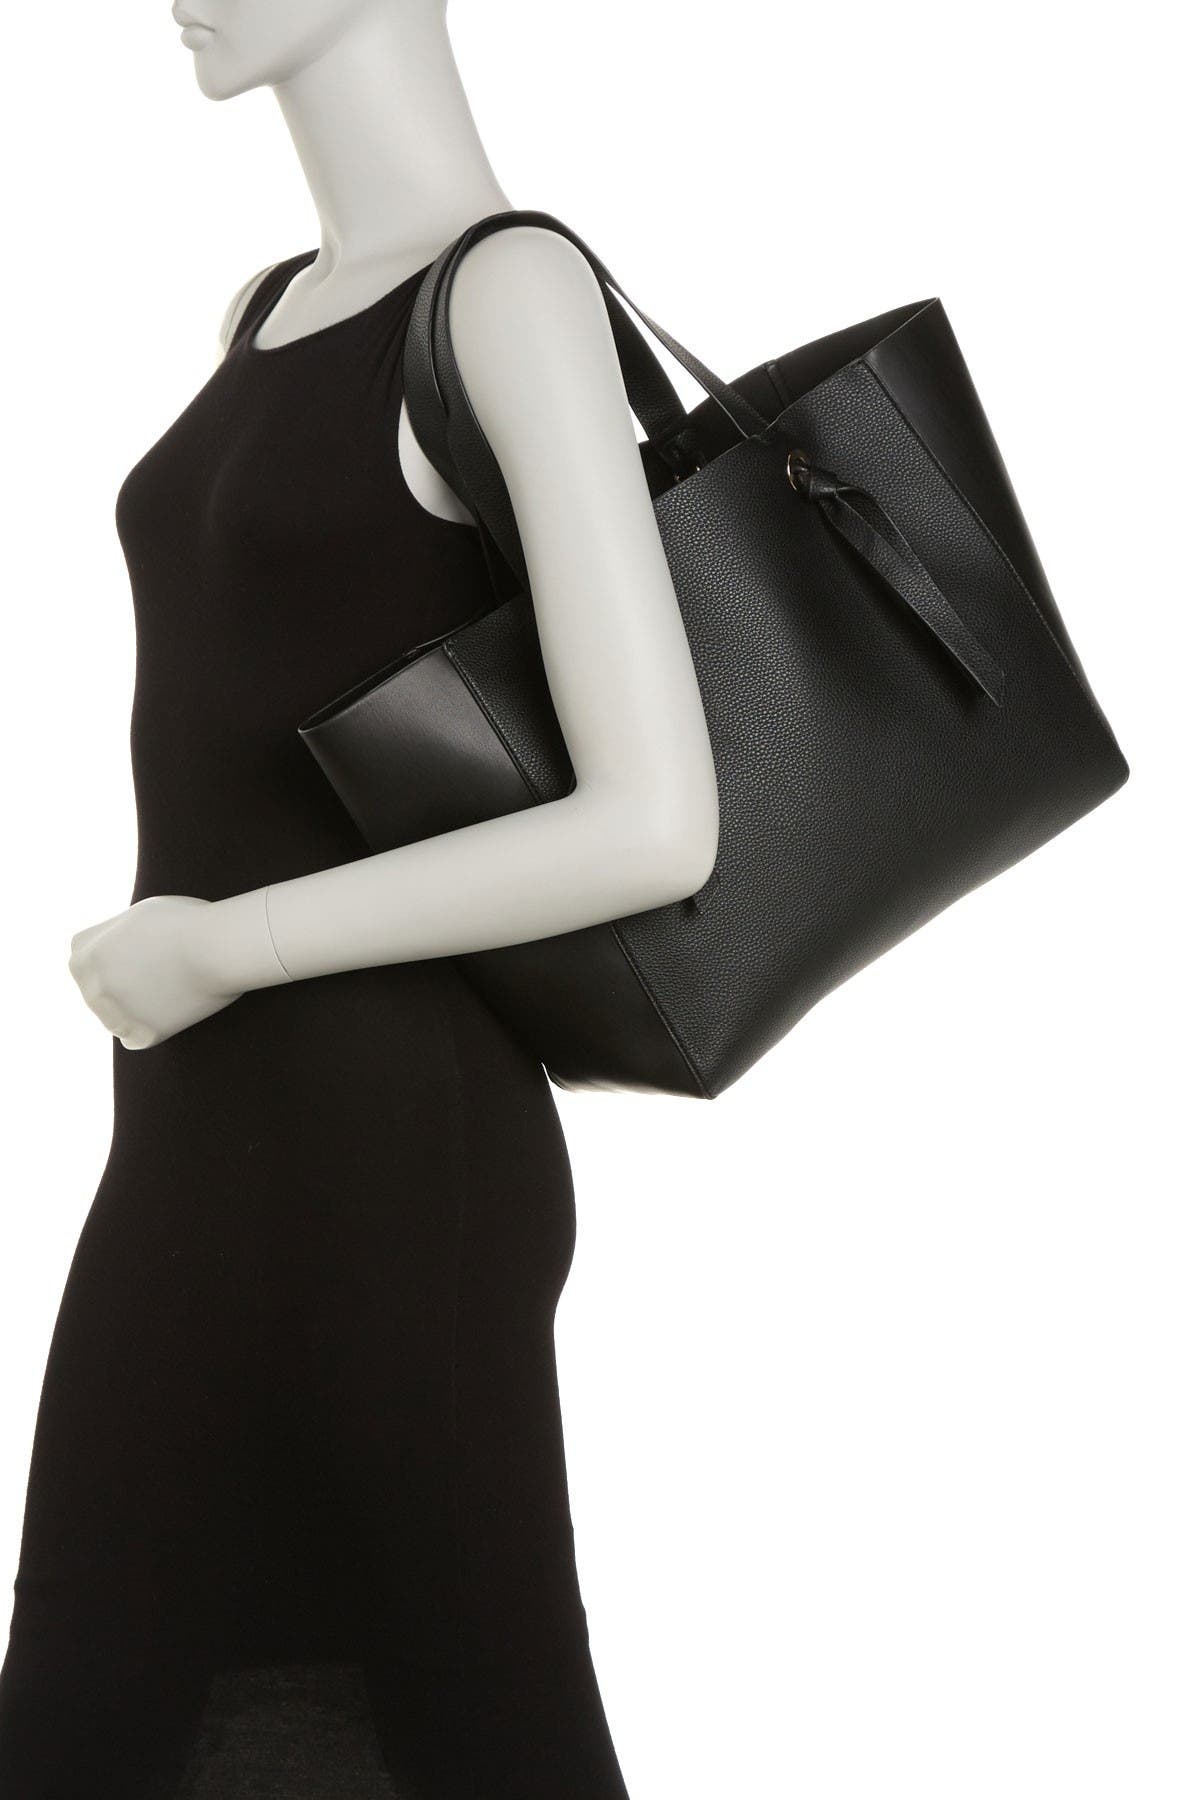 Melrose And Market Sofia Tote In Black